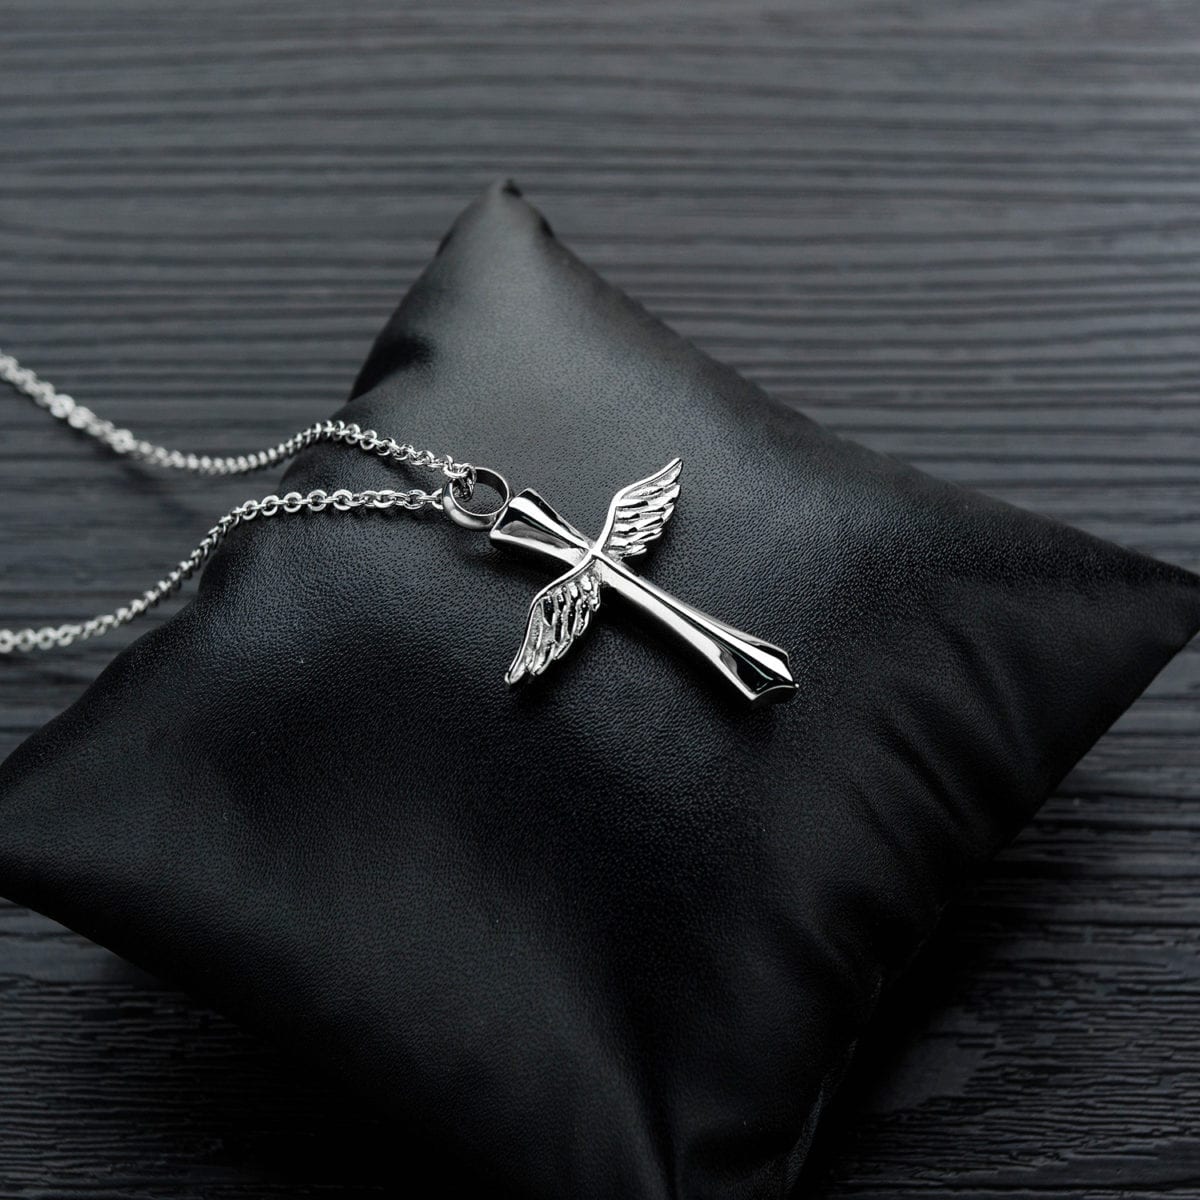 Cremation Jewelry Solid Stainless Steel Cross Cremation Pendant Urn Necklace  Ashes Necklace Urn Jewelry Necklace for Ashes 9272 - Etsy | Stainless steel cross  pendant, Urn jewelry, Cremation jewelry